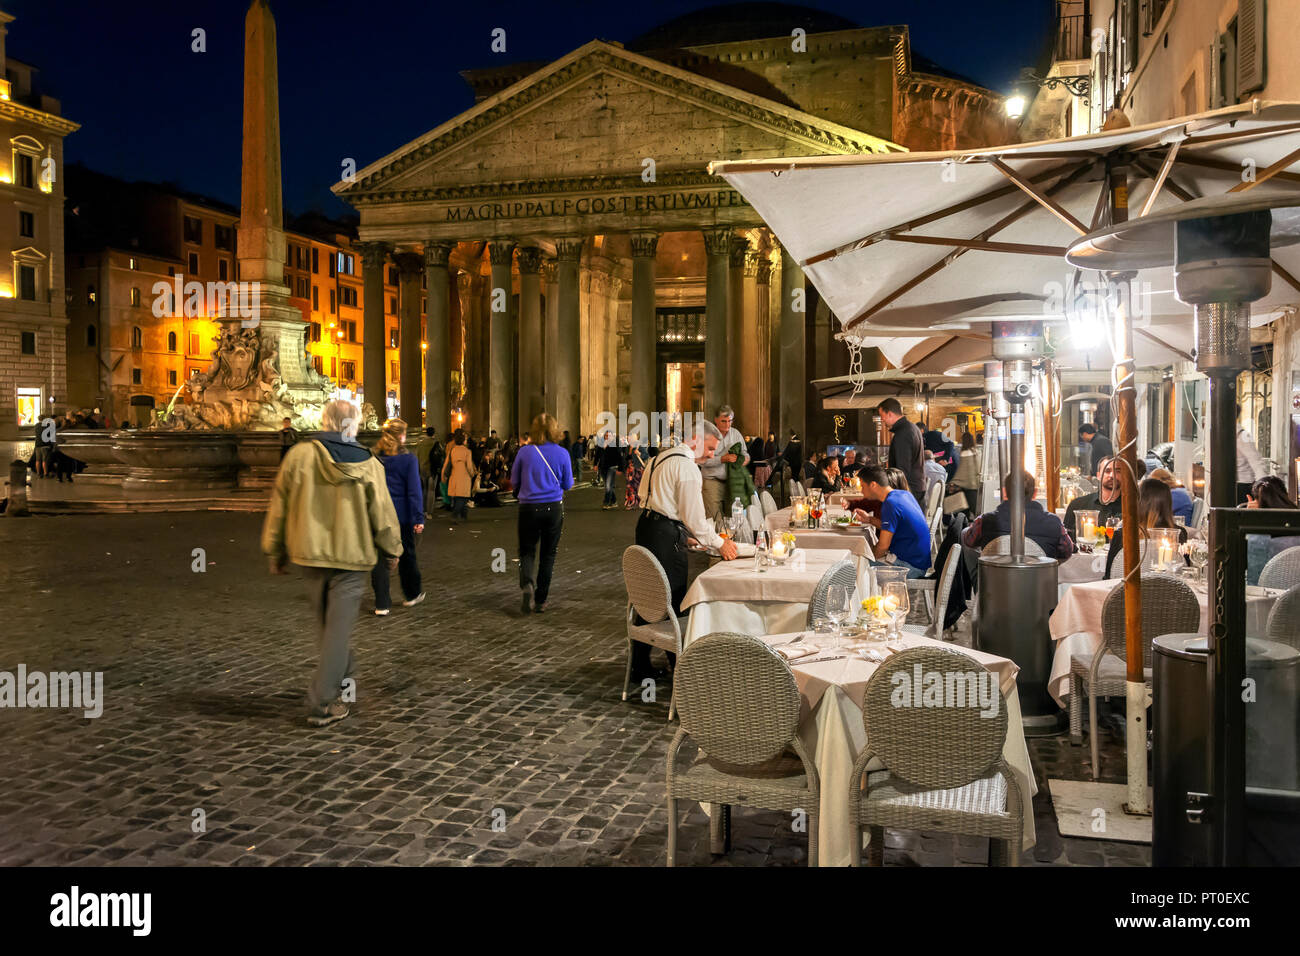 Rome, Italy, march 24, 2017: Pantheon square at night with open restaurants and tourists Stock Photo